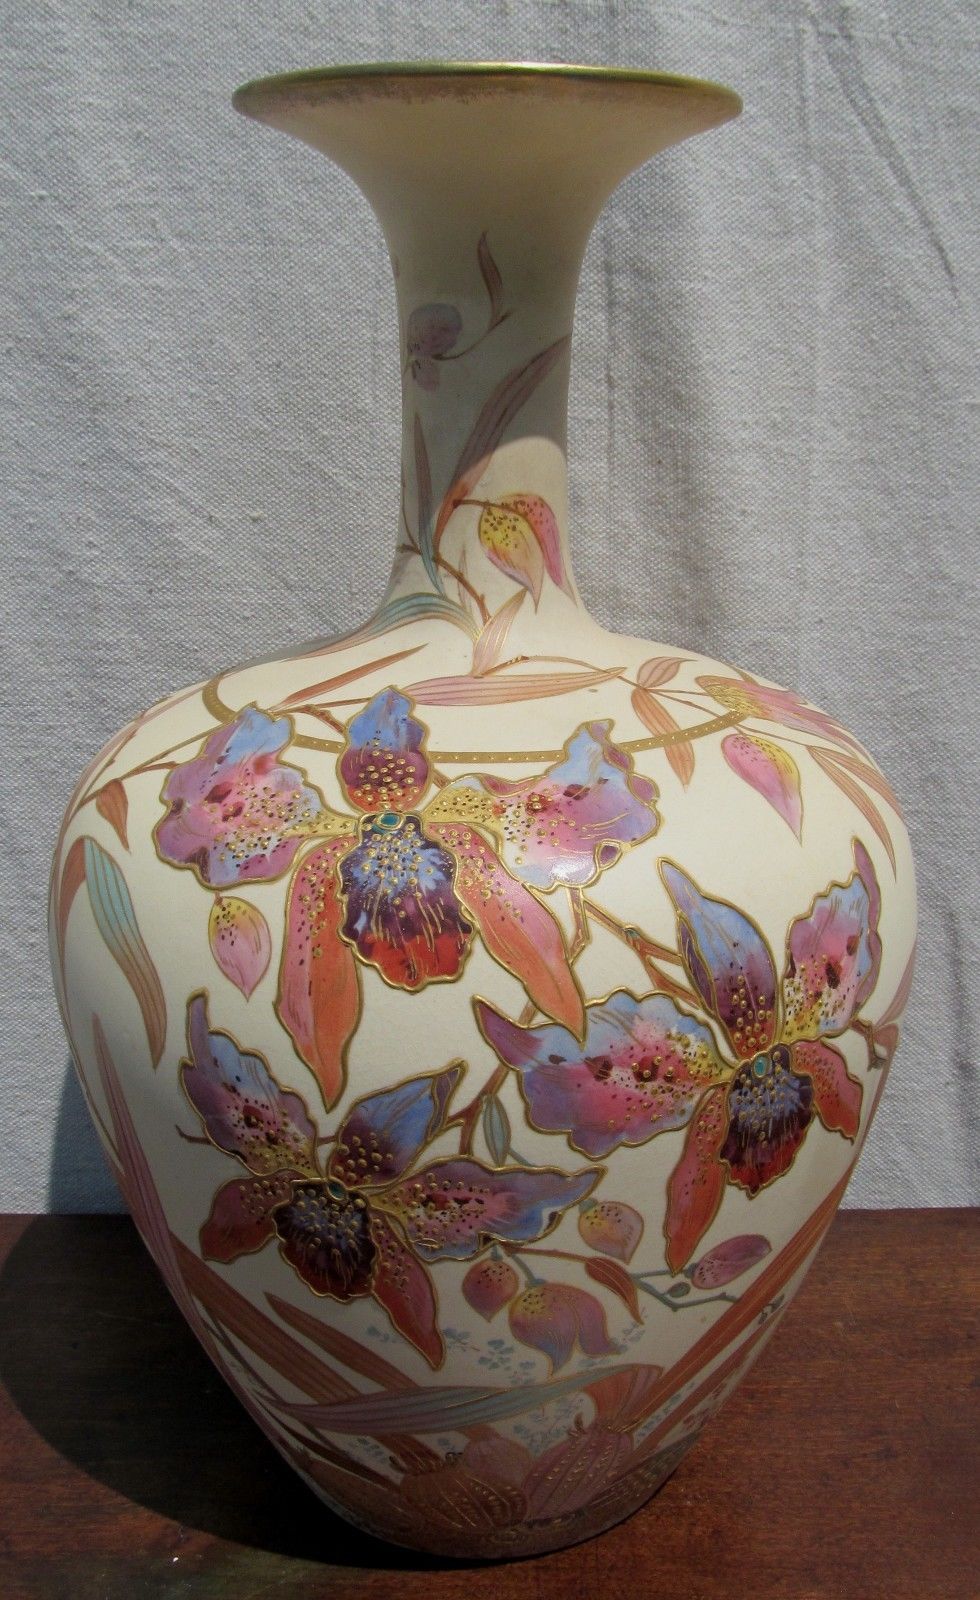 LARGE EXCELLENT STOKE ON TRENT POINTONS FLORAL PAINTED VASE 13 1/2: TALL-BEST!